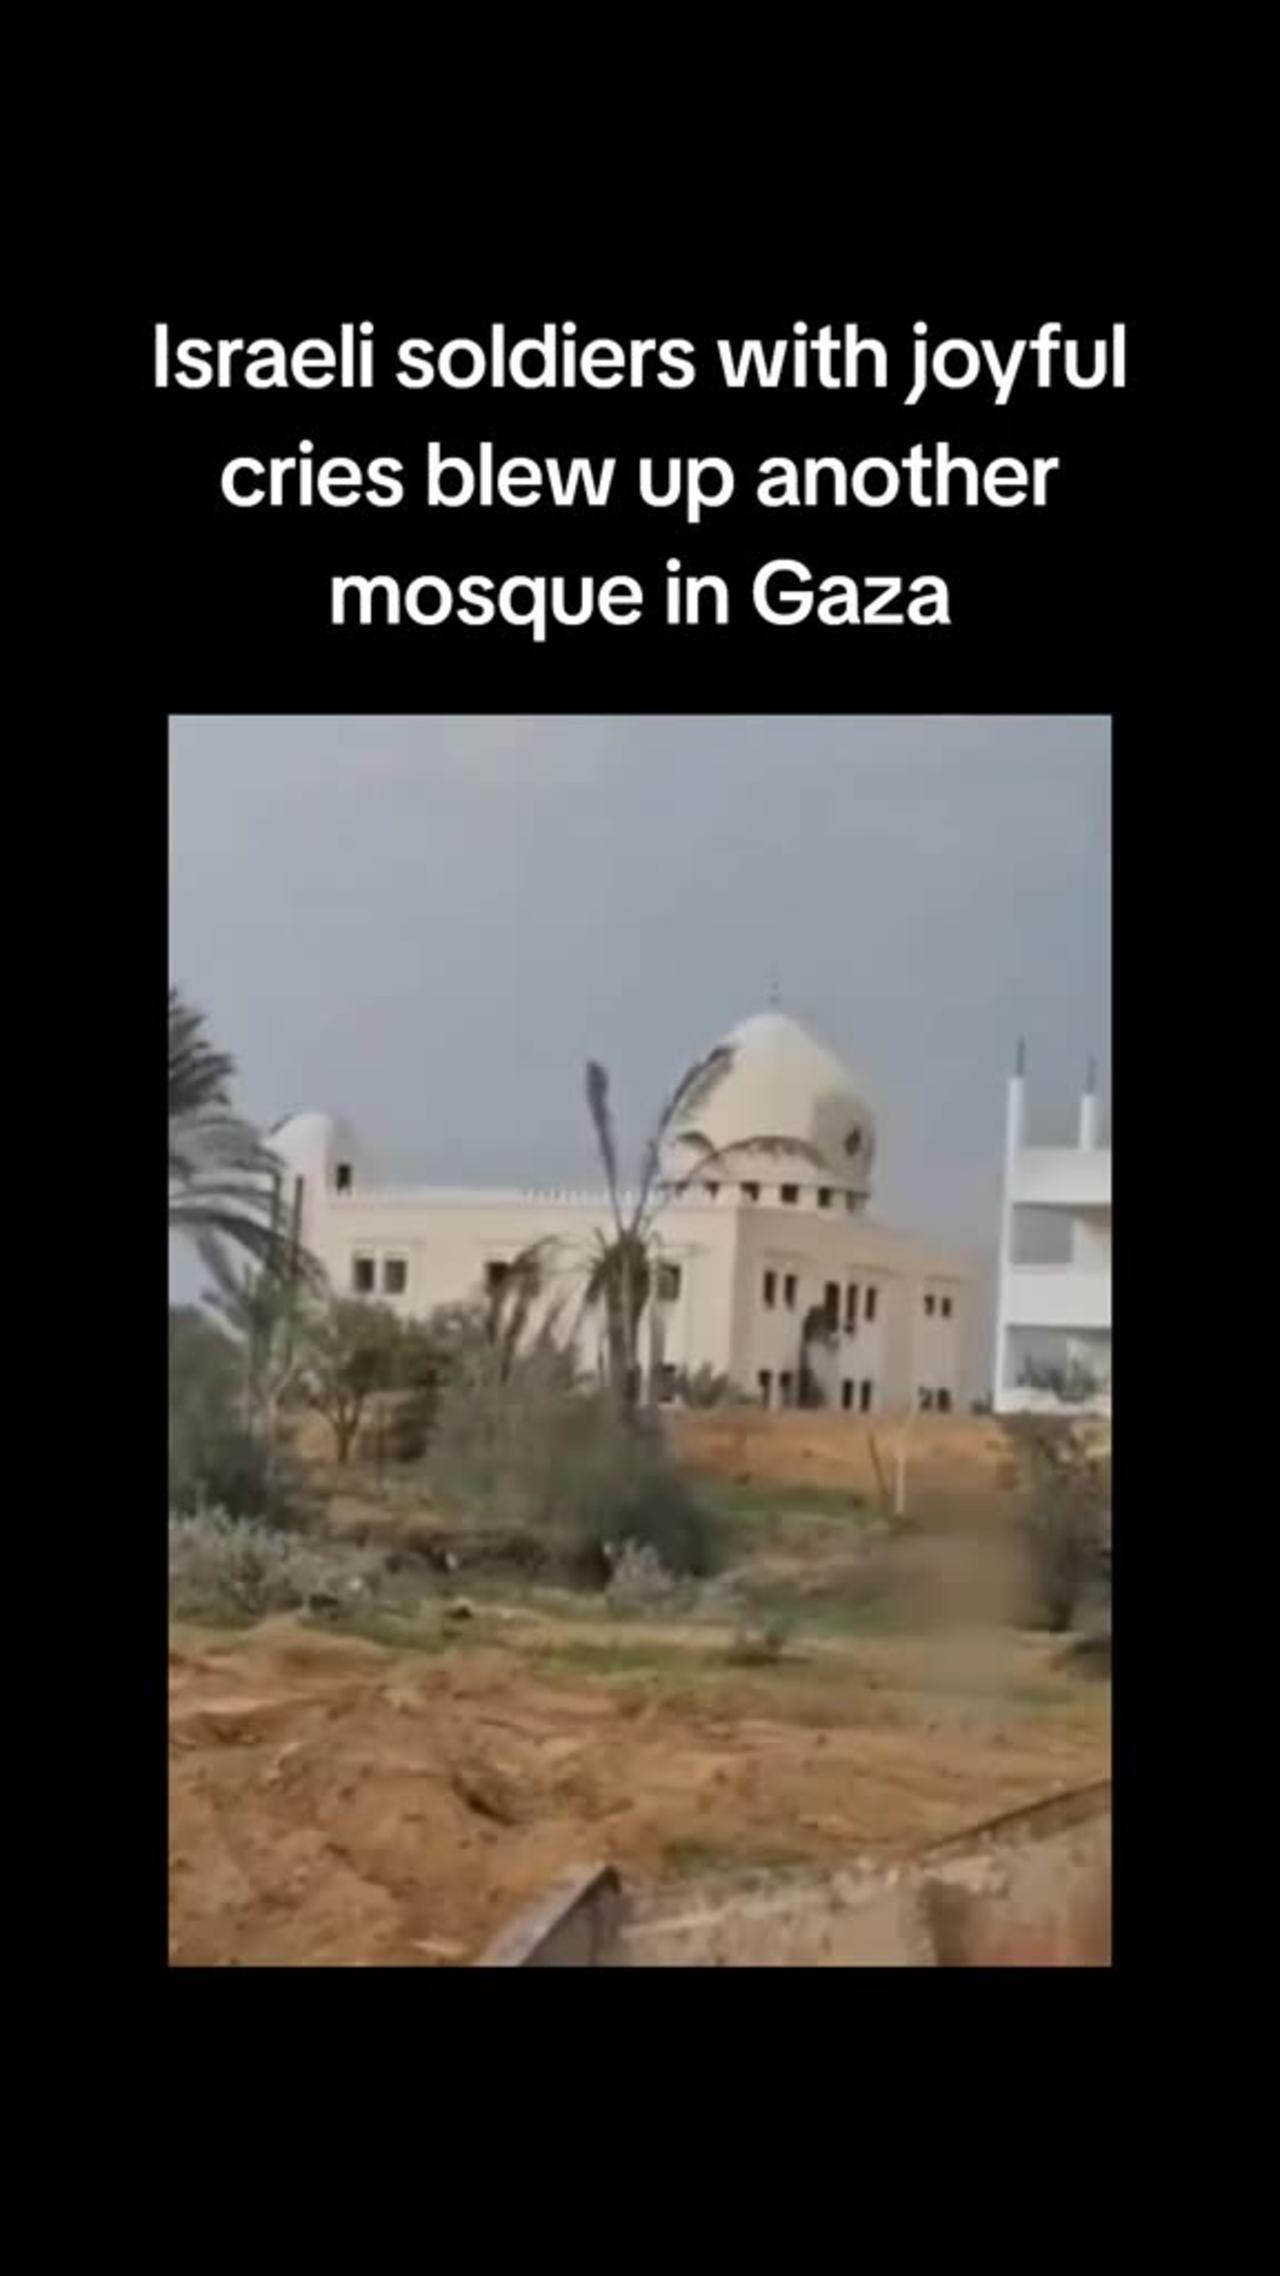 Israeli soldiers with joyful cries blew up another mosque in Gaza